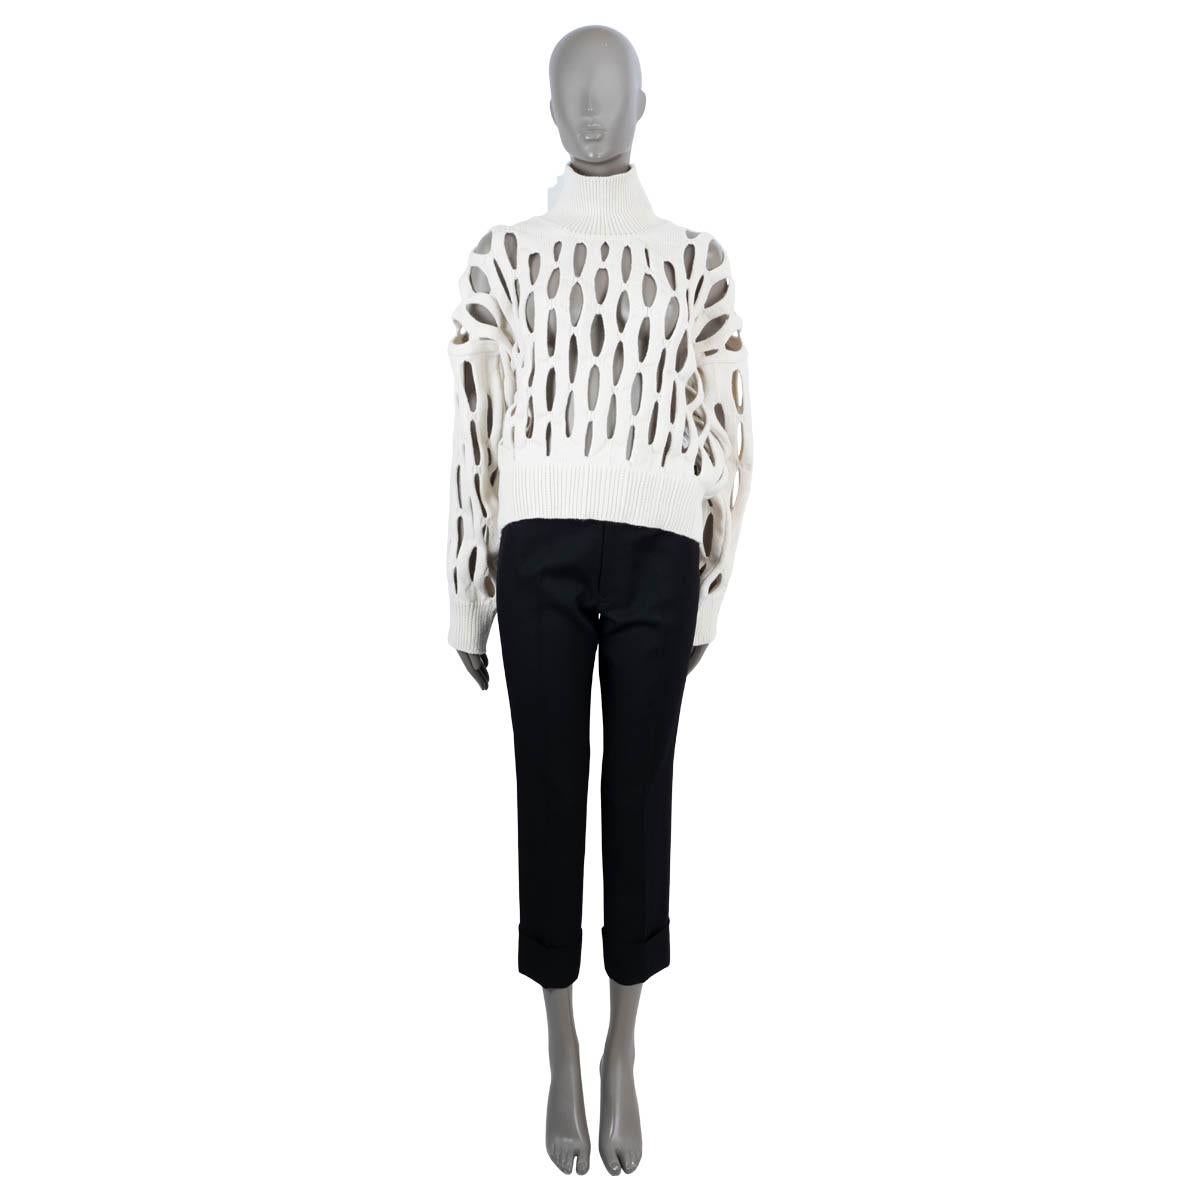 100% authentic Alaïa turtleneck sweater in ivory wool (100%). Features geometric cut-outs, rib-knit neck, hem and cuffs. Unlined. Has been worn and is in excellent condition.

2022 Spring/Summer

Measurements
Model	AA9S01551M682
Tag